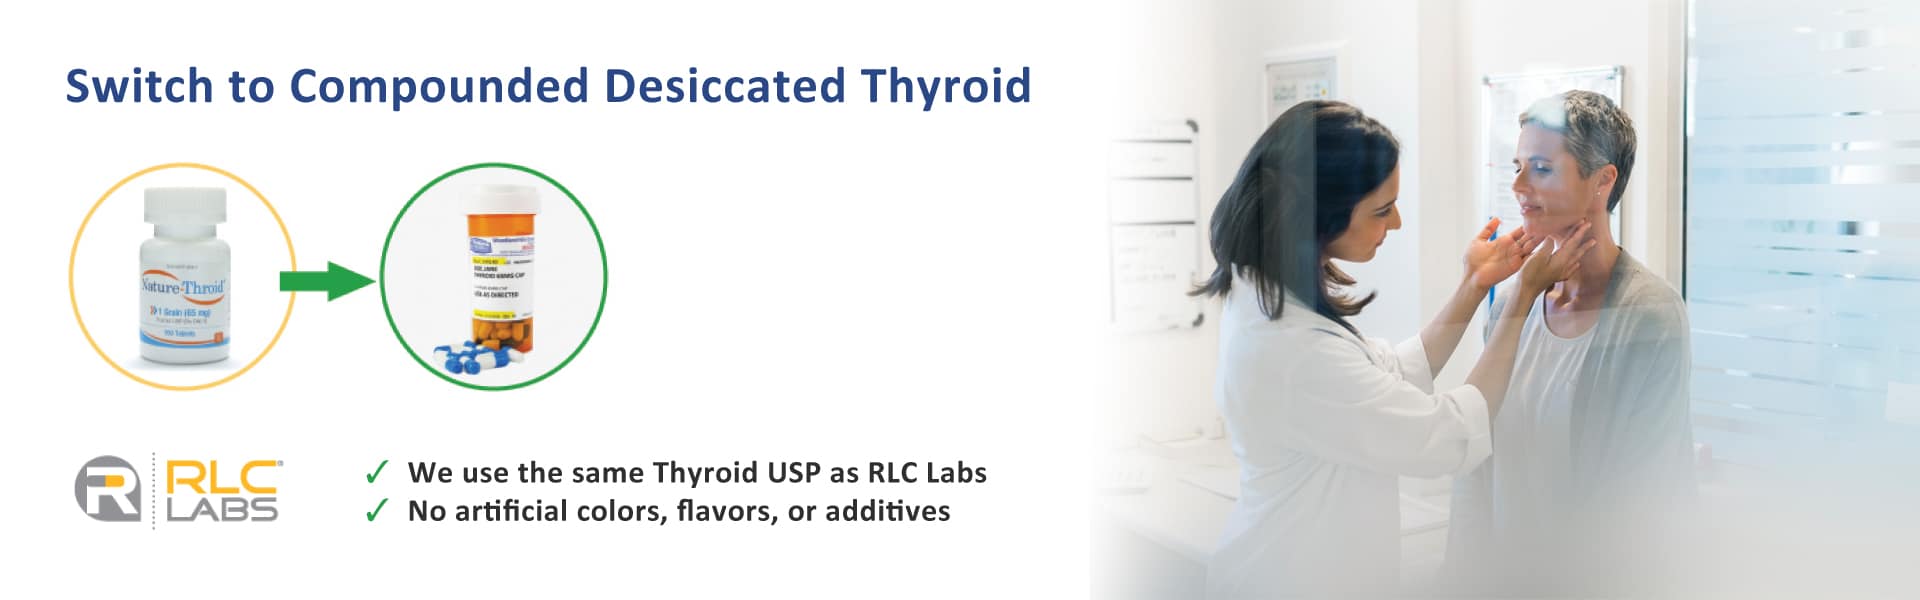 our pharmacy compounds desiccated thyroid in any dosage required using the same active ingreedient as RLC Labs